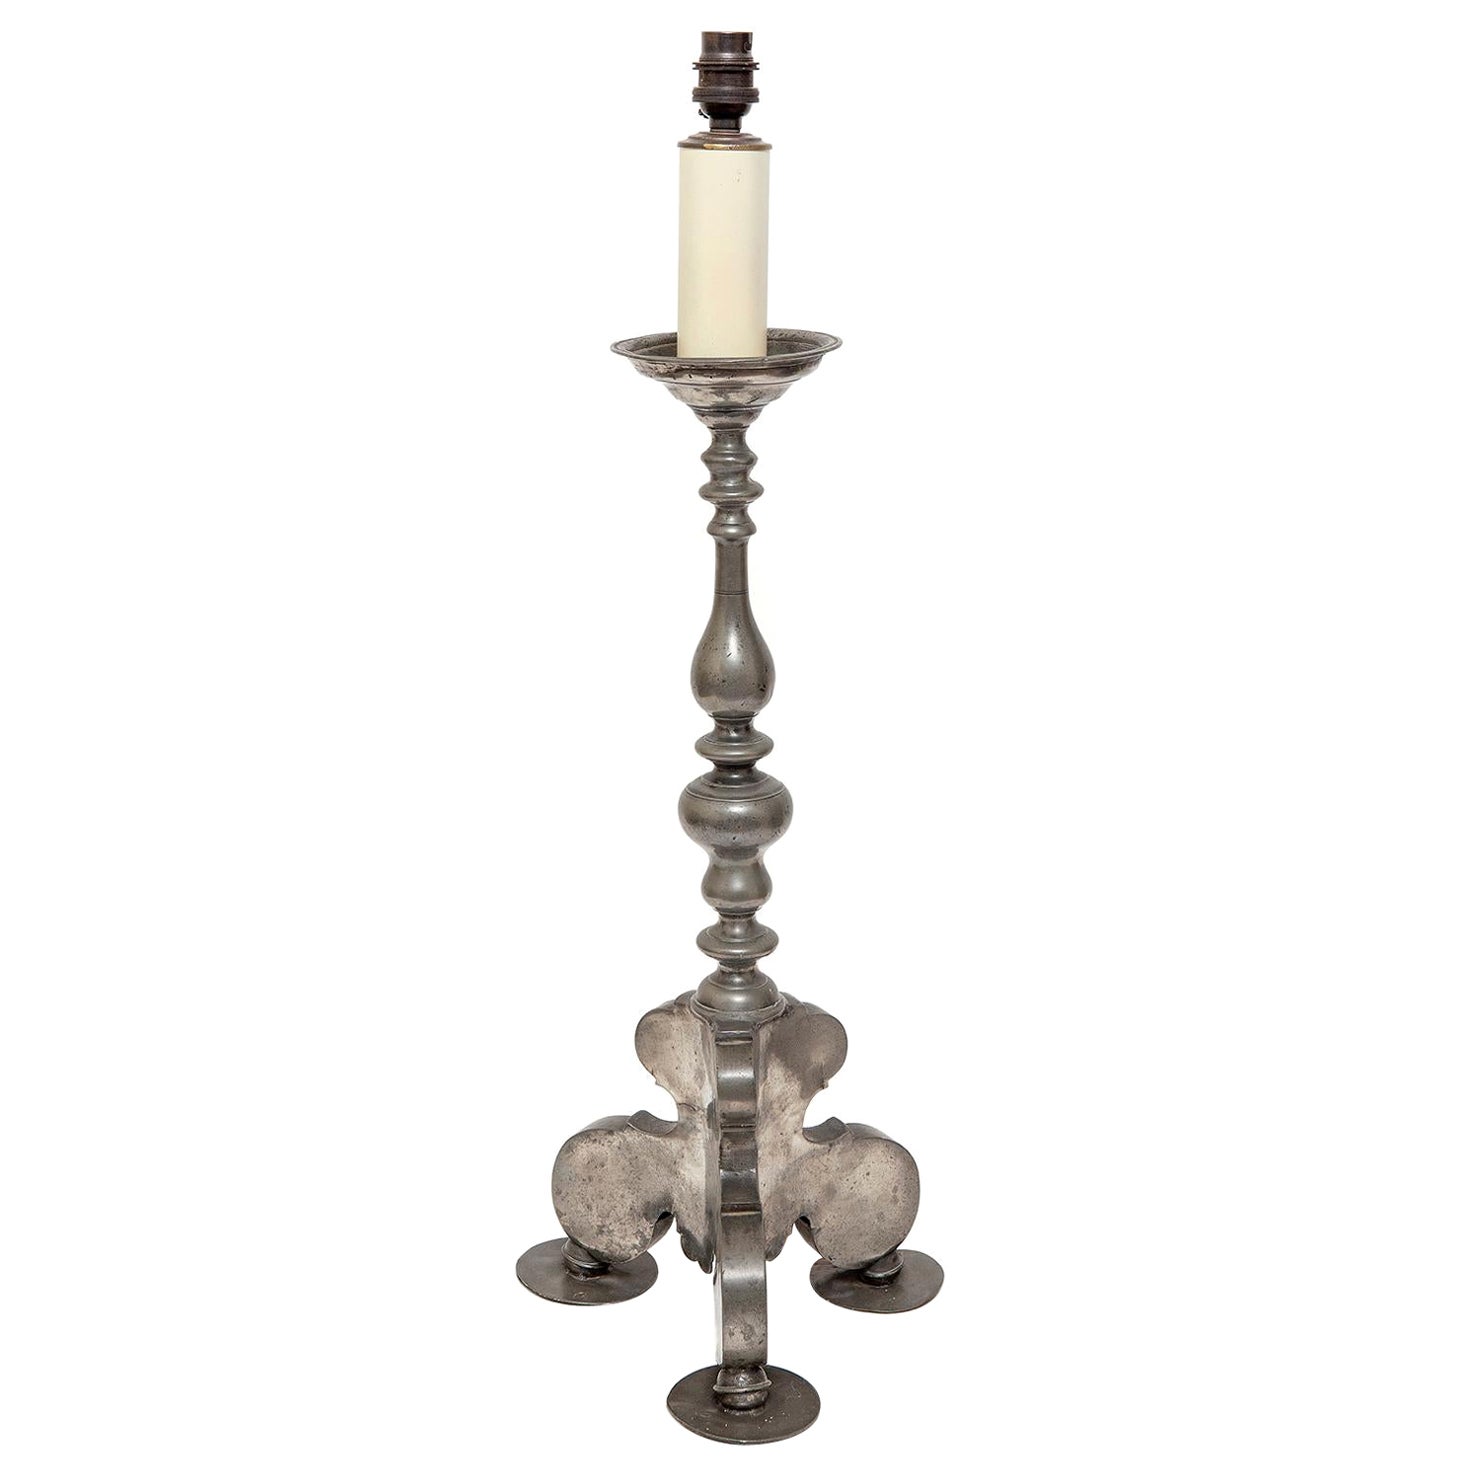 Lamp Table Candlestick Pewter 17th Century Baroque